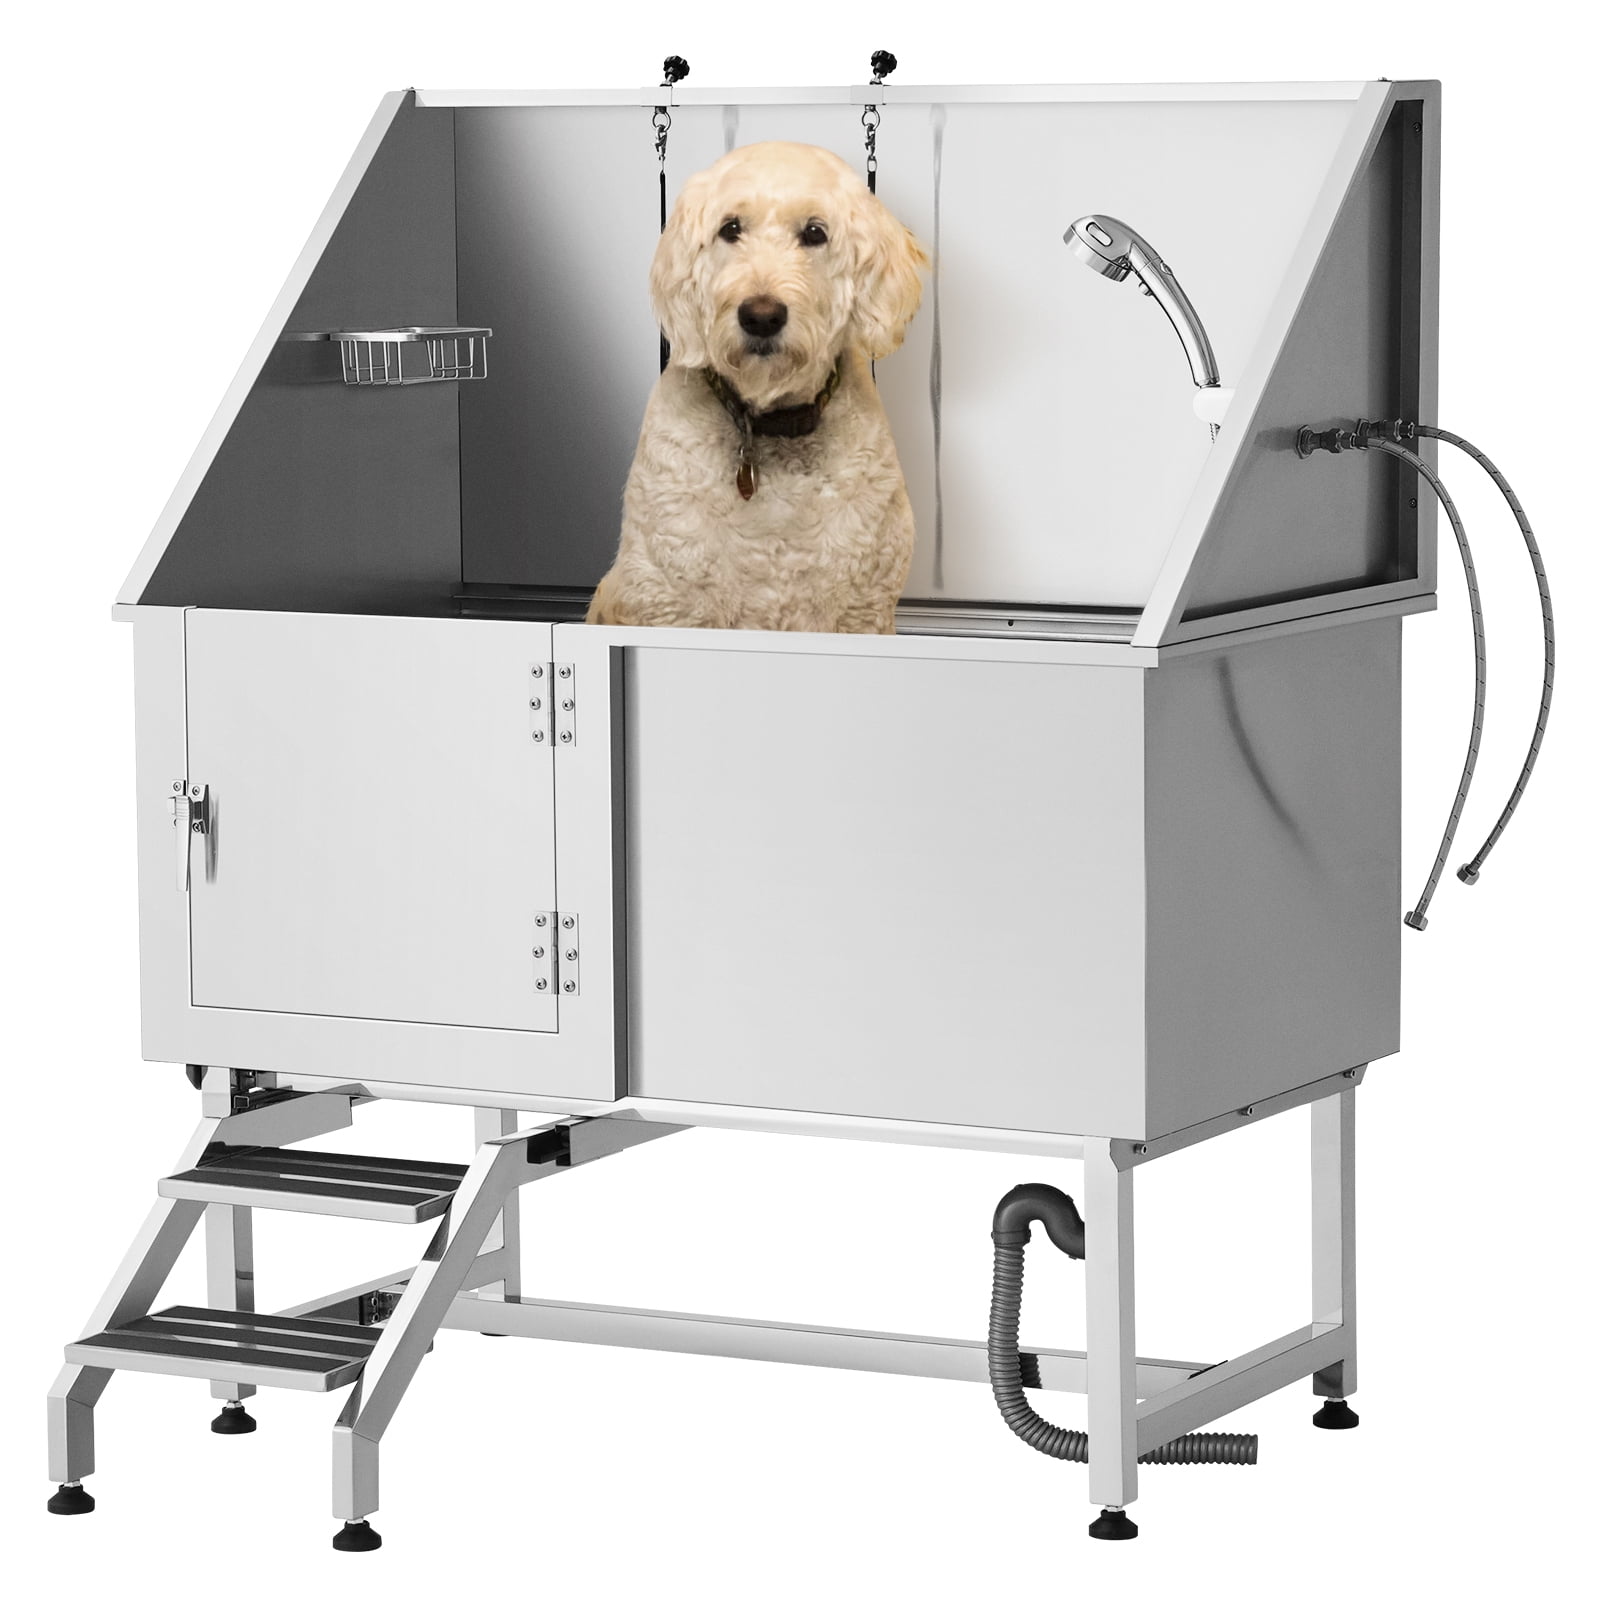 CO-Z 50” Stainless Steel Dog Grooming Kit, Pet Bathing Station